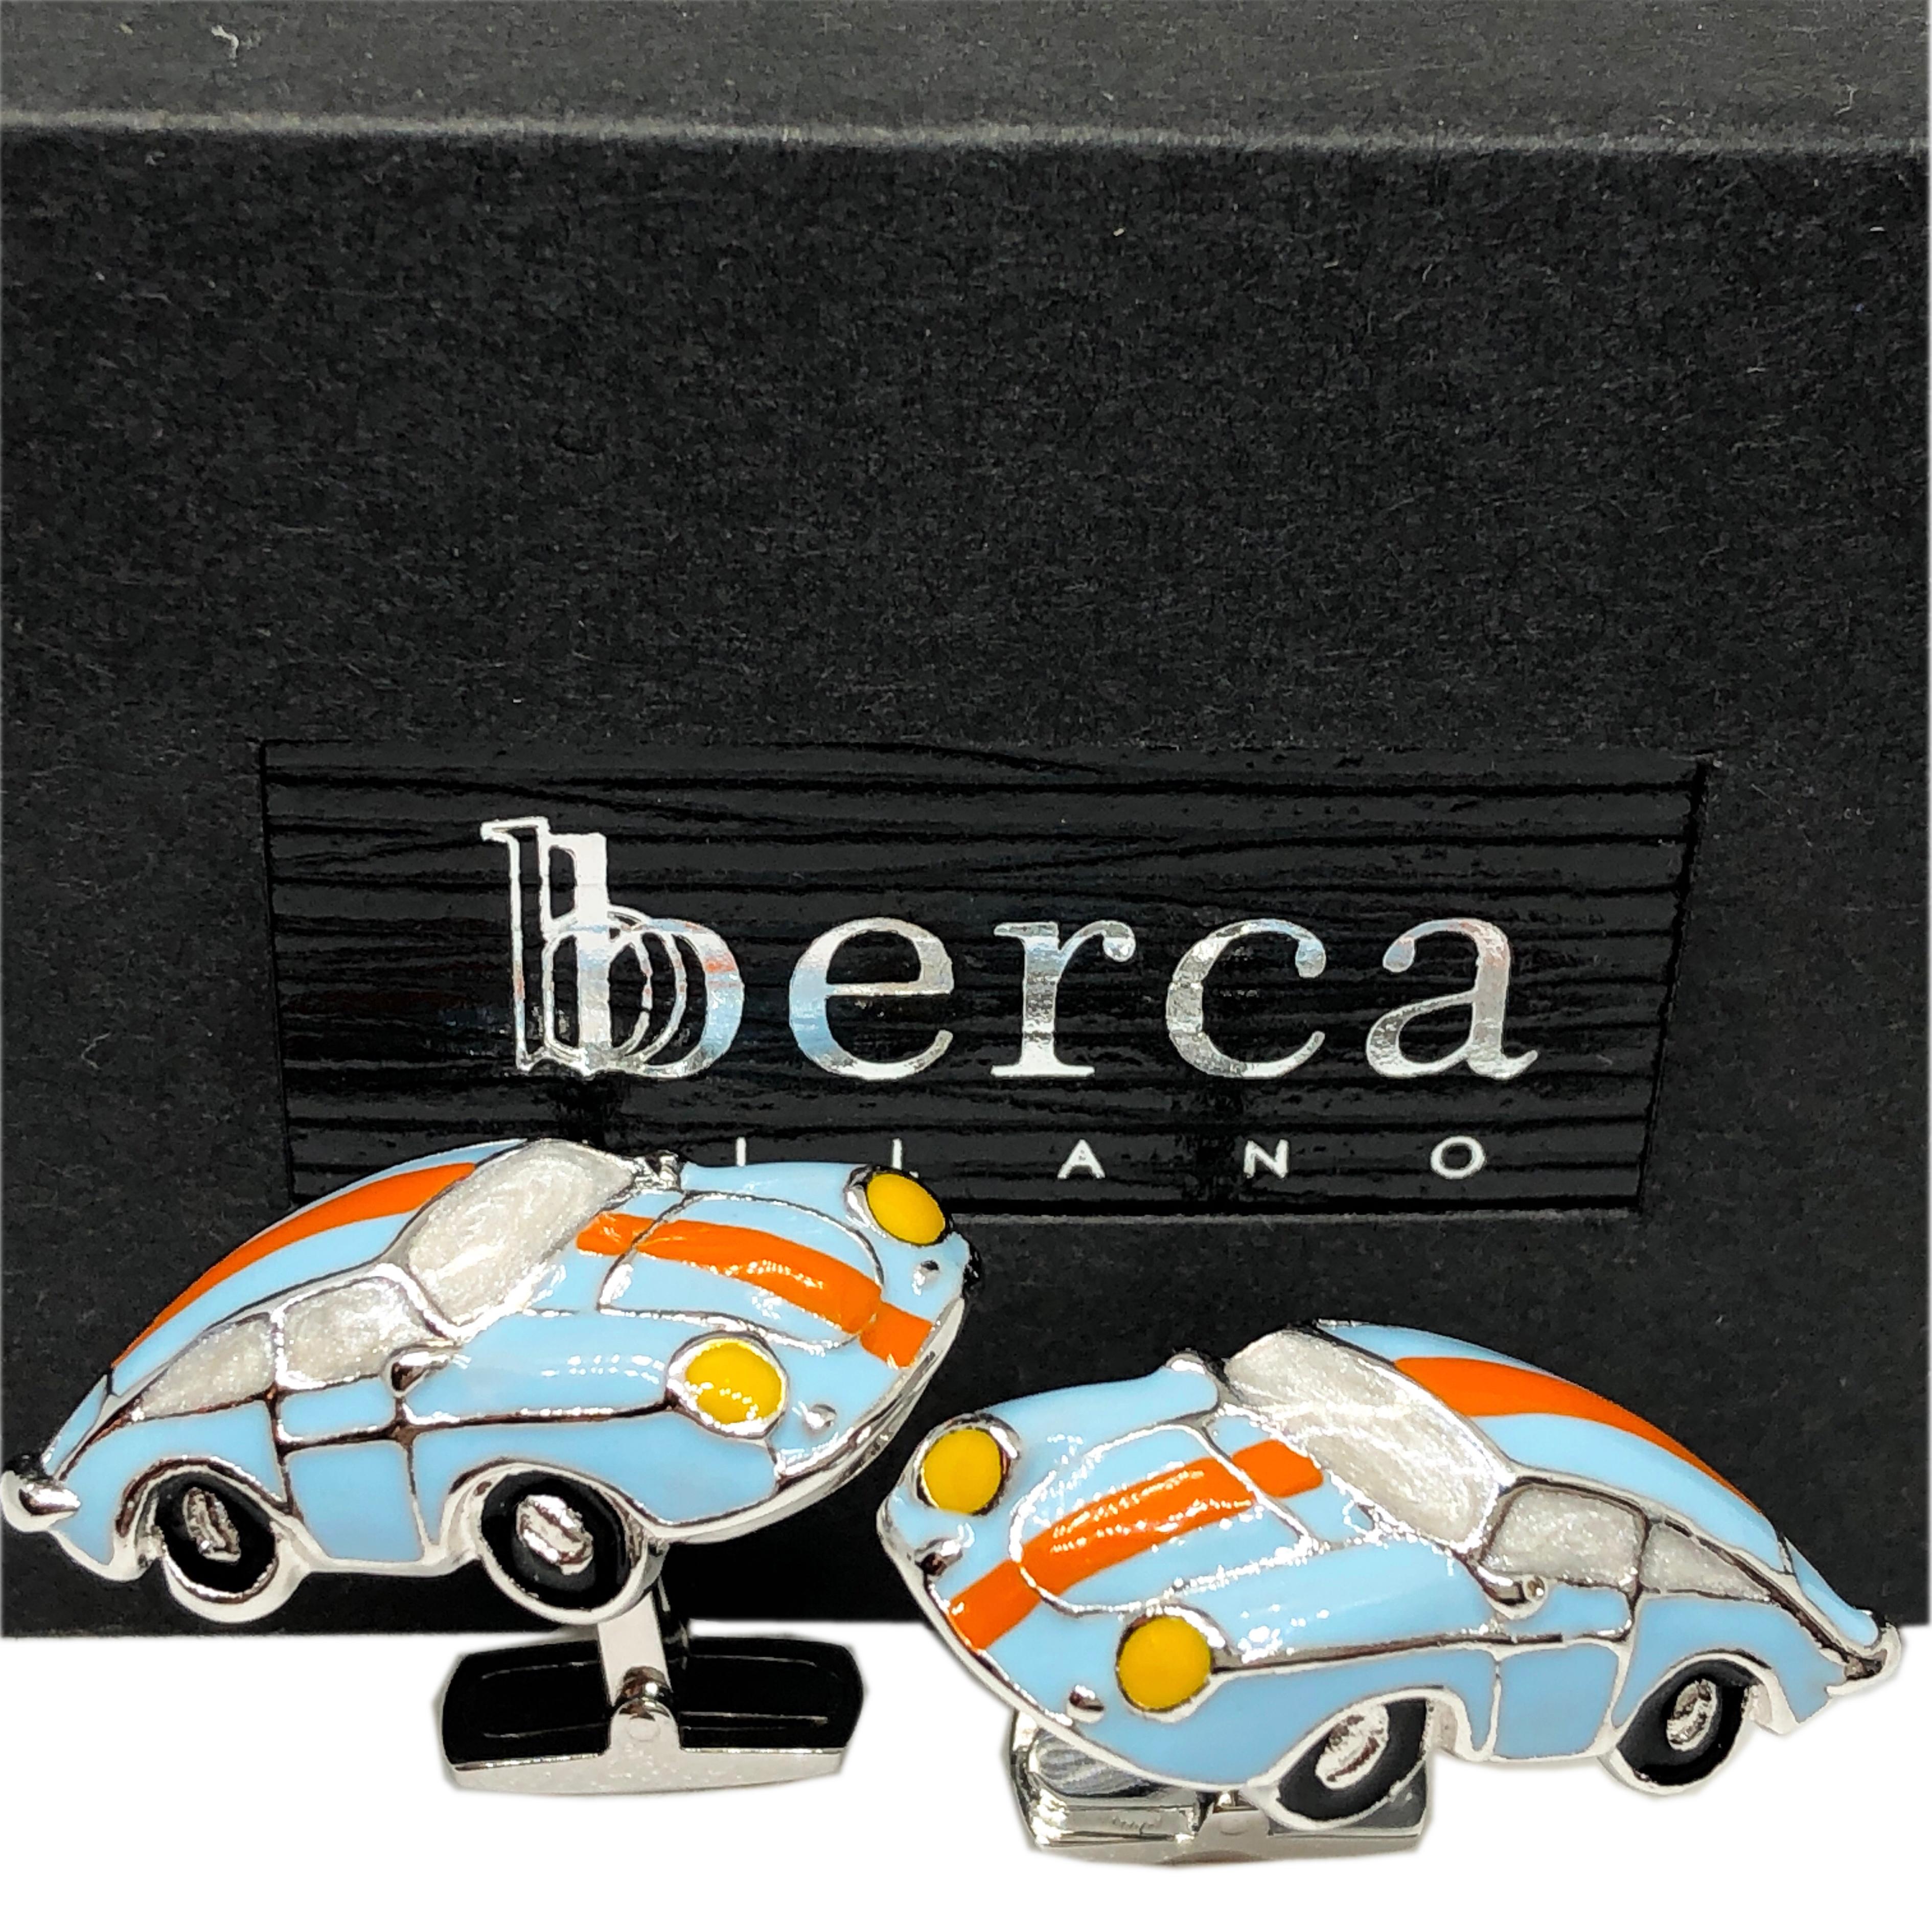 Le Man's Racing Color 911 Porsche Shaped T-Bar Back Hand Enameled Sterling Silver Cufflinks.
In our smart Black Box and Pouch.

